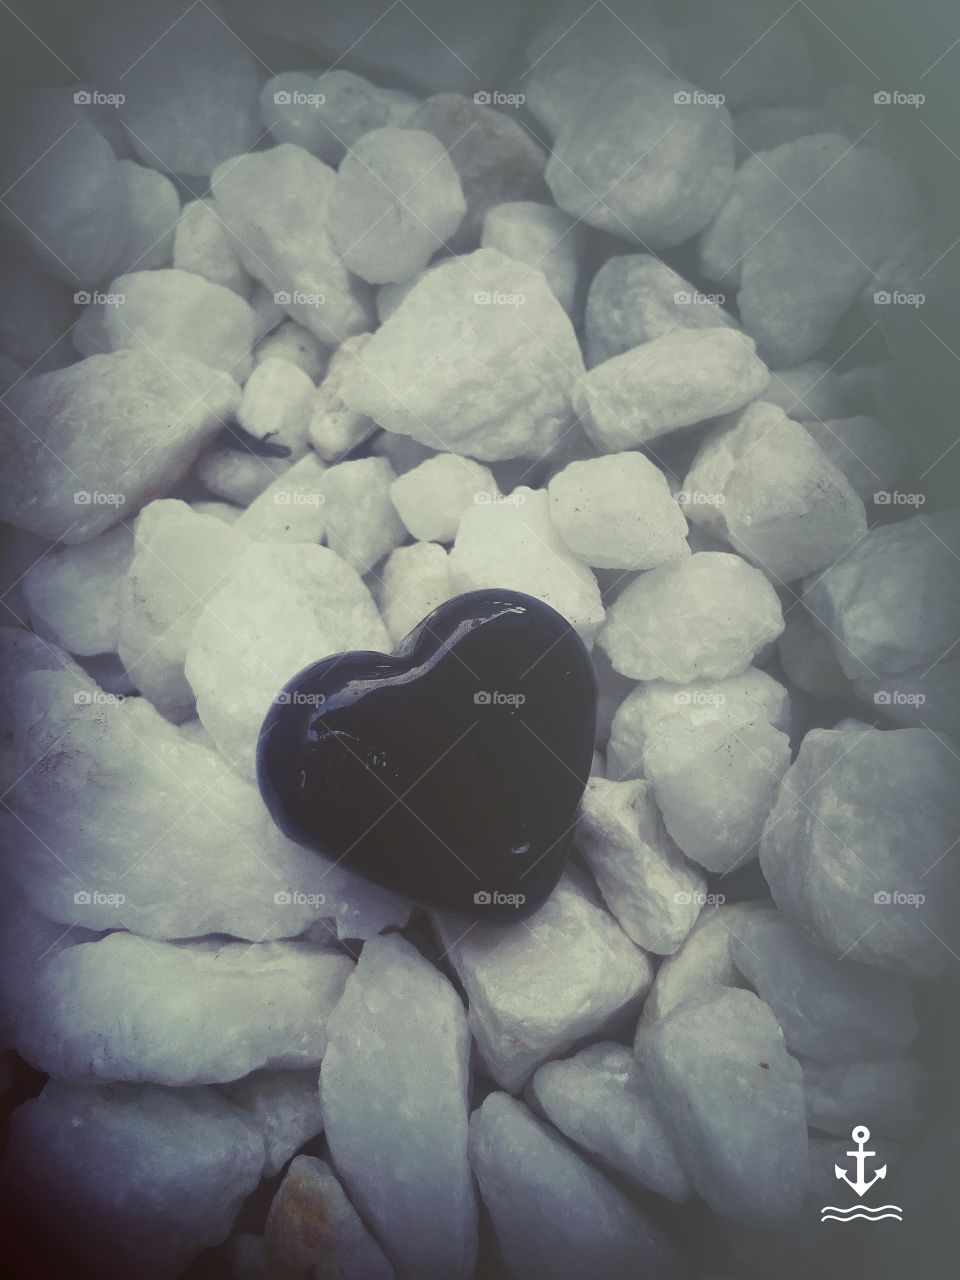 Black Heart shaped rock Surrounded but other plain rocks. Everything is unique, even in rocks.